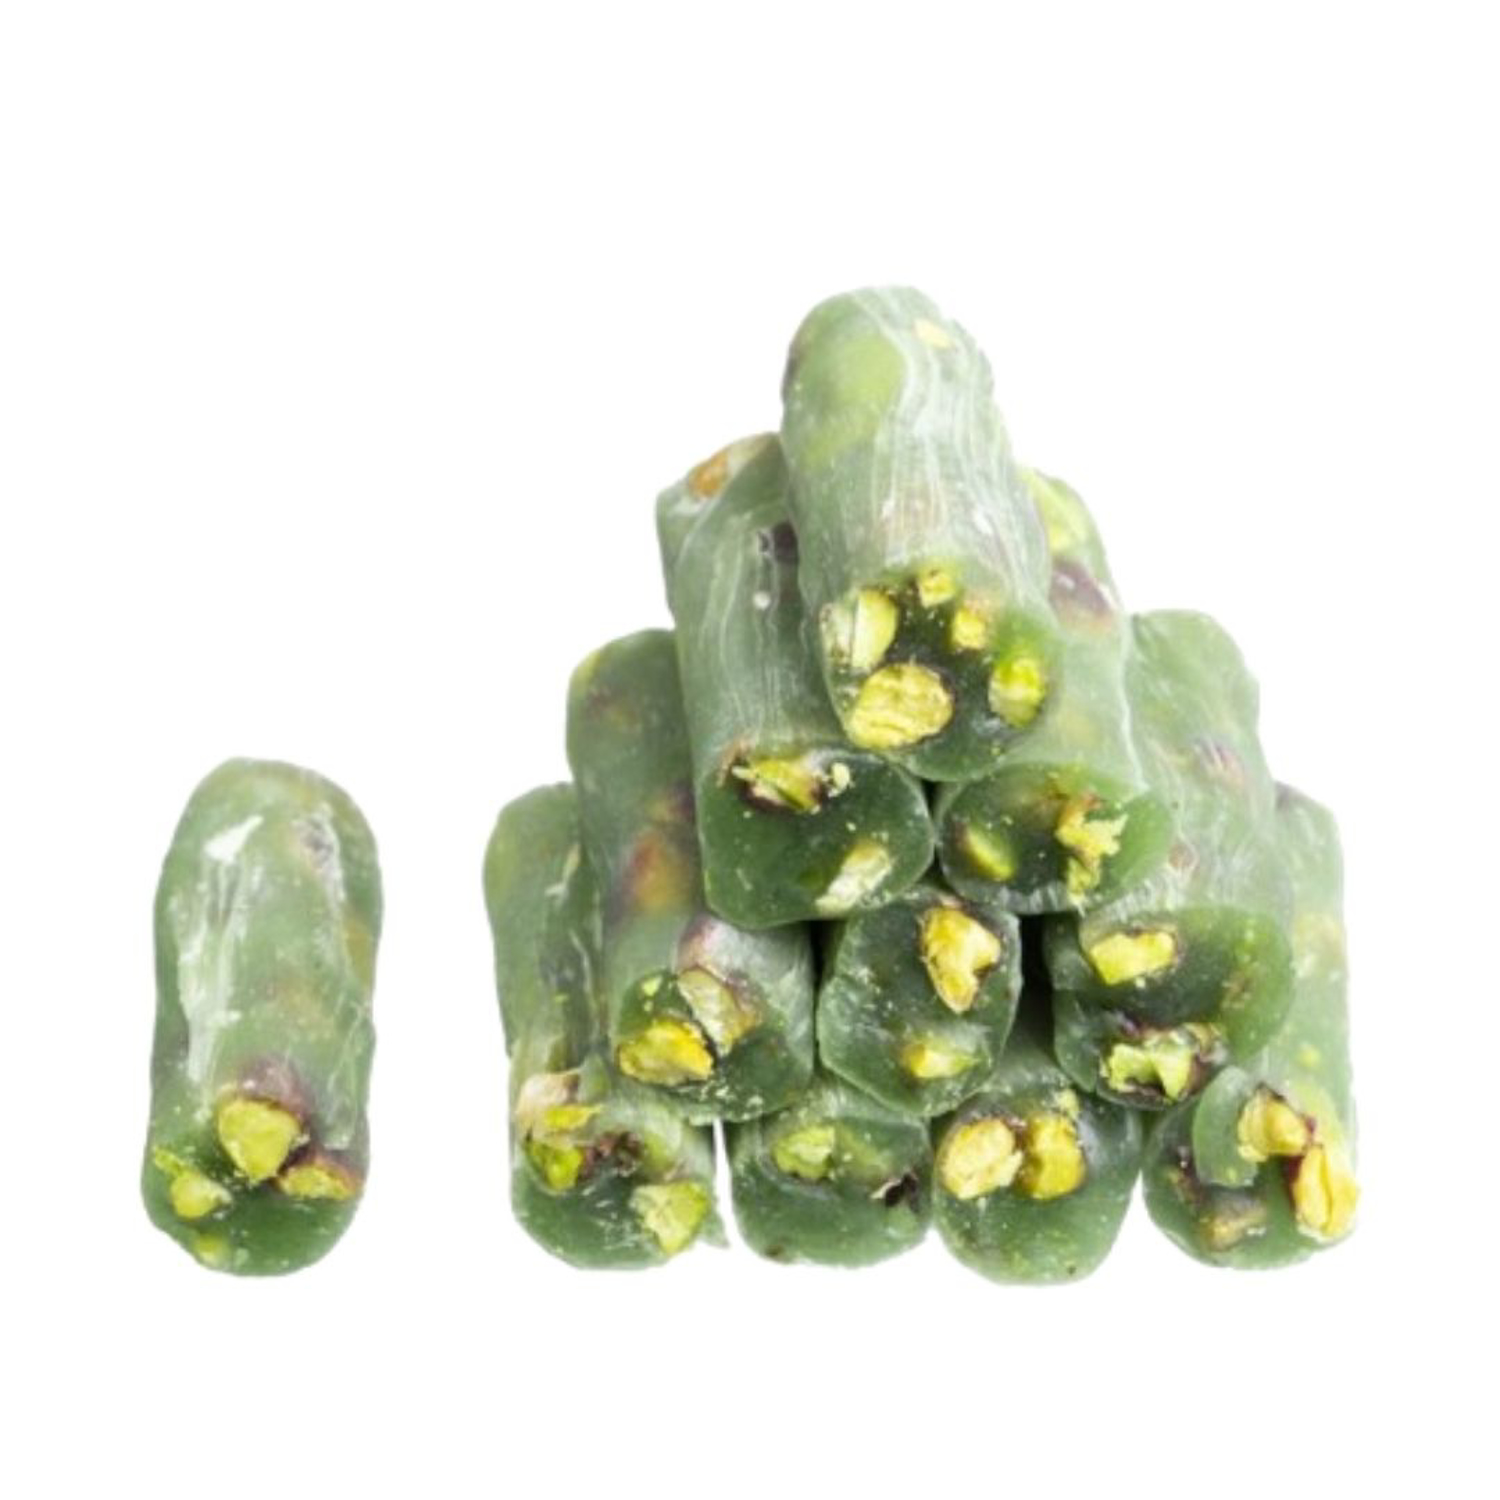 Picture of MEVLANA TURKISH DELIGHT FINGER WITH PISTACHIO AND APPLE FLAVOR